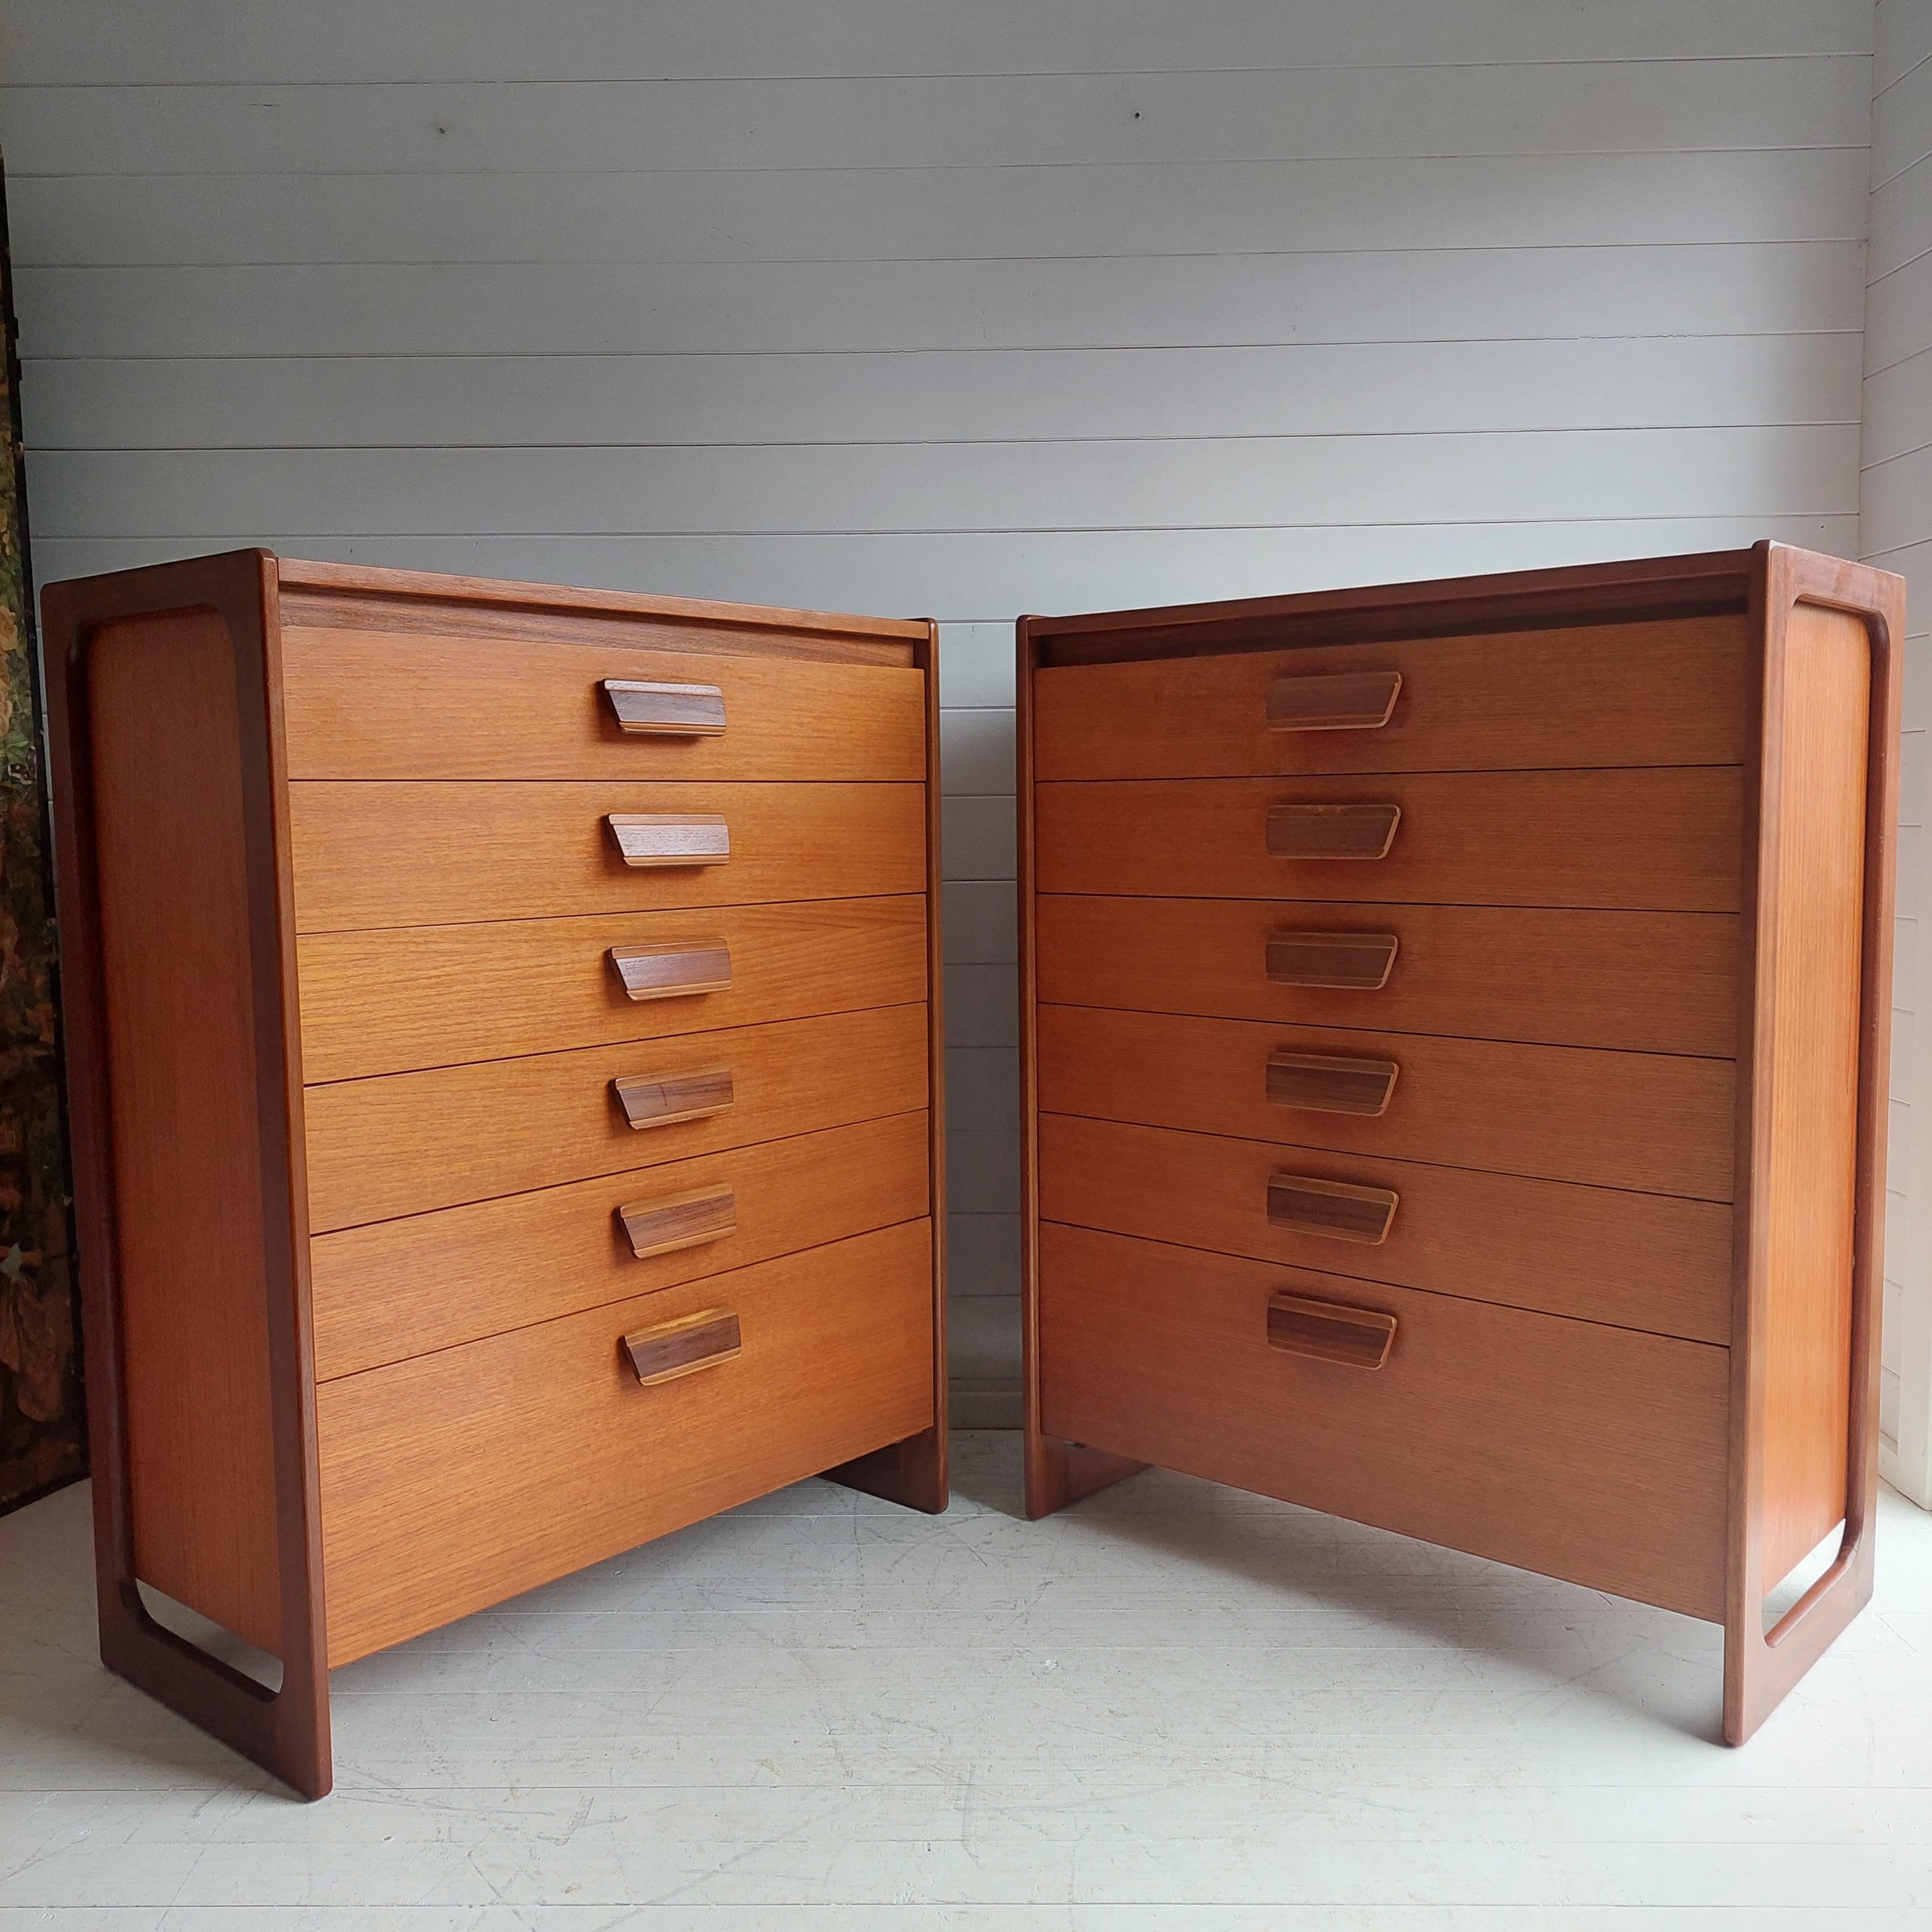 A mid century pair of chest of drawers / tallboy of impressive proportions manufactured by William Lawrence.
Simplistic design featuring six good sized drawers with solid teak handles and solid teak full length sides/legs.
A wonderful set of 2